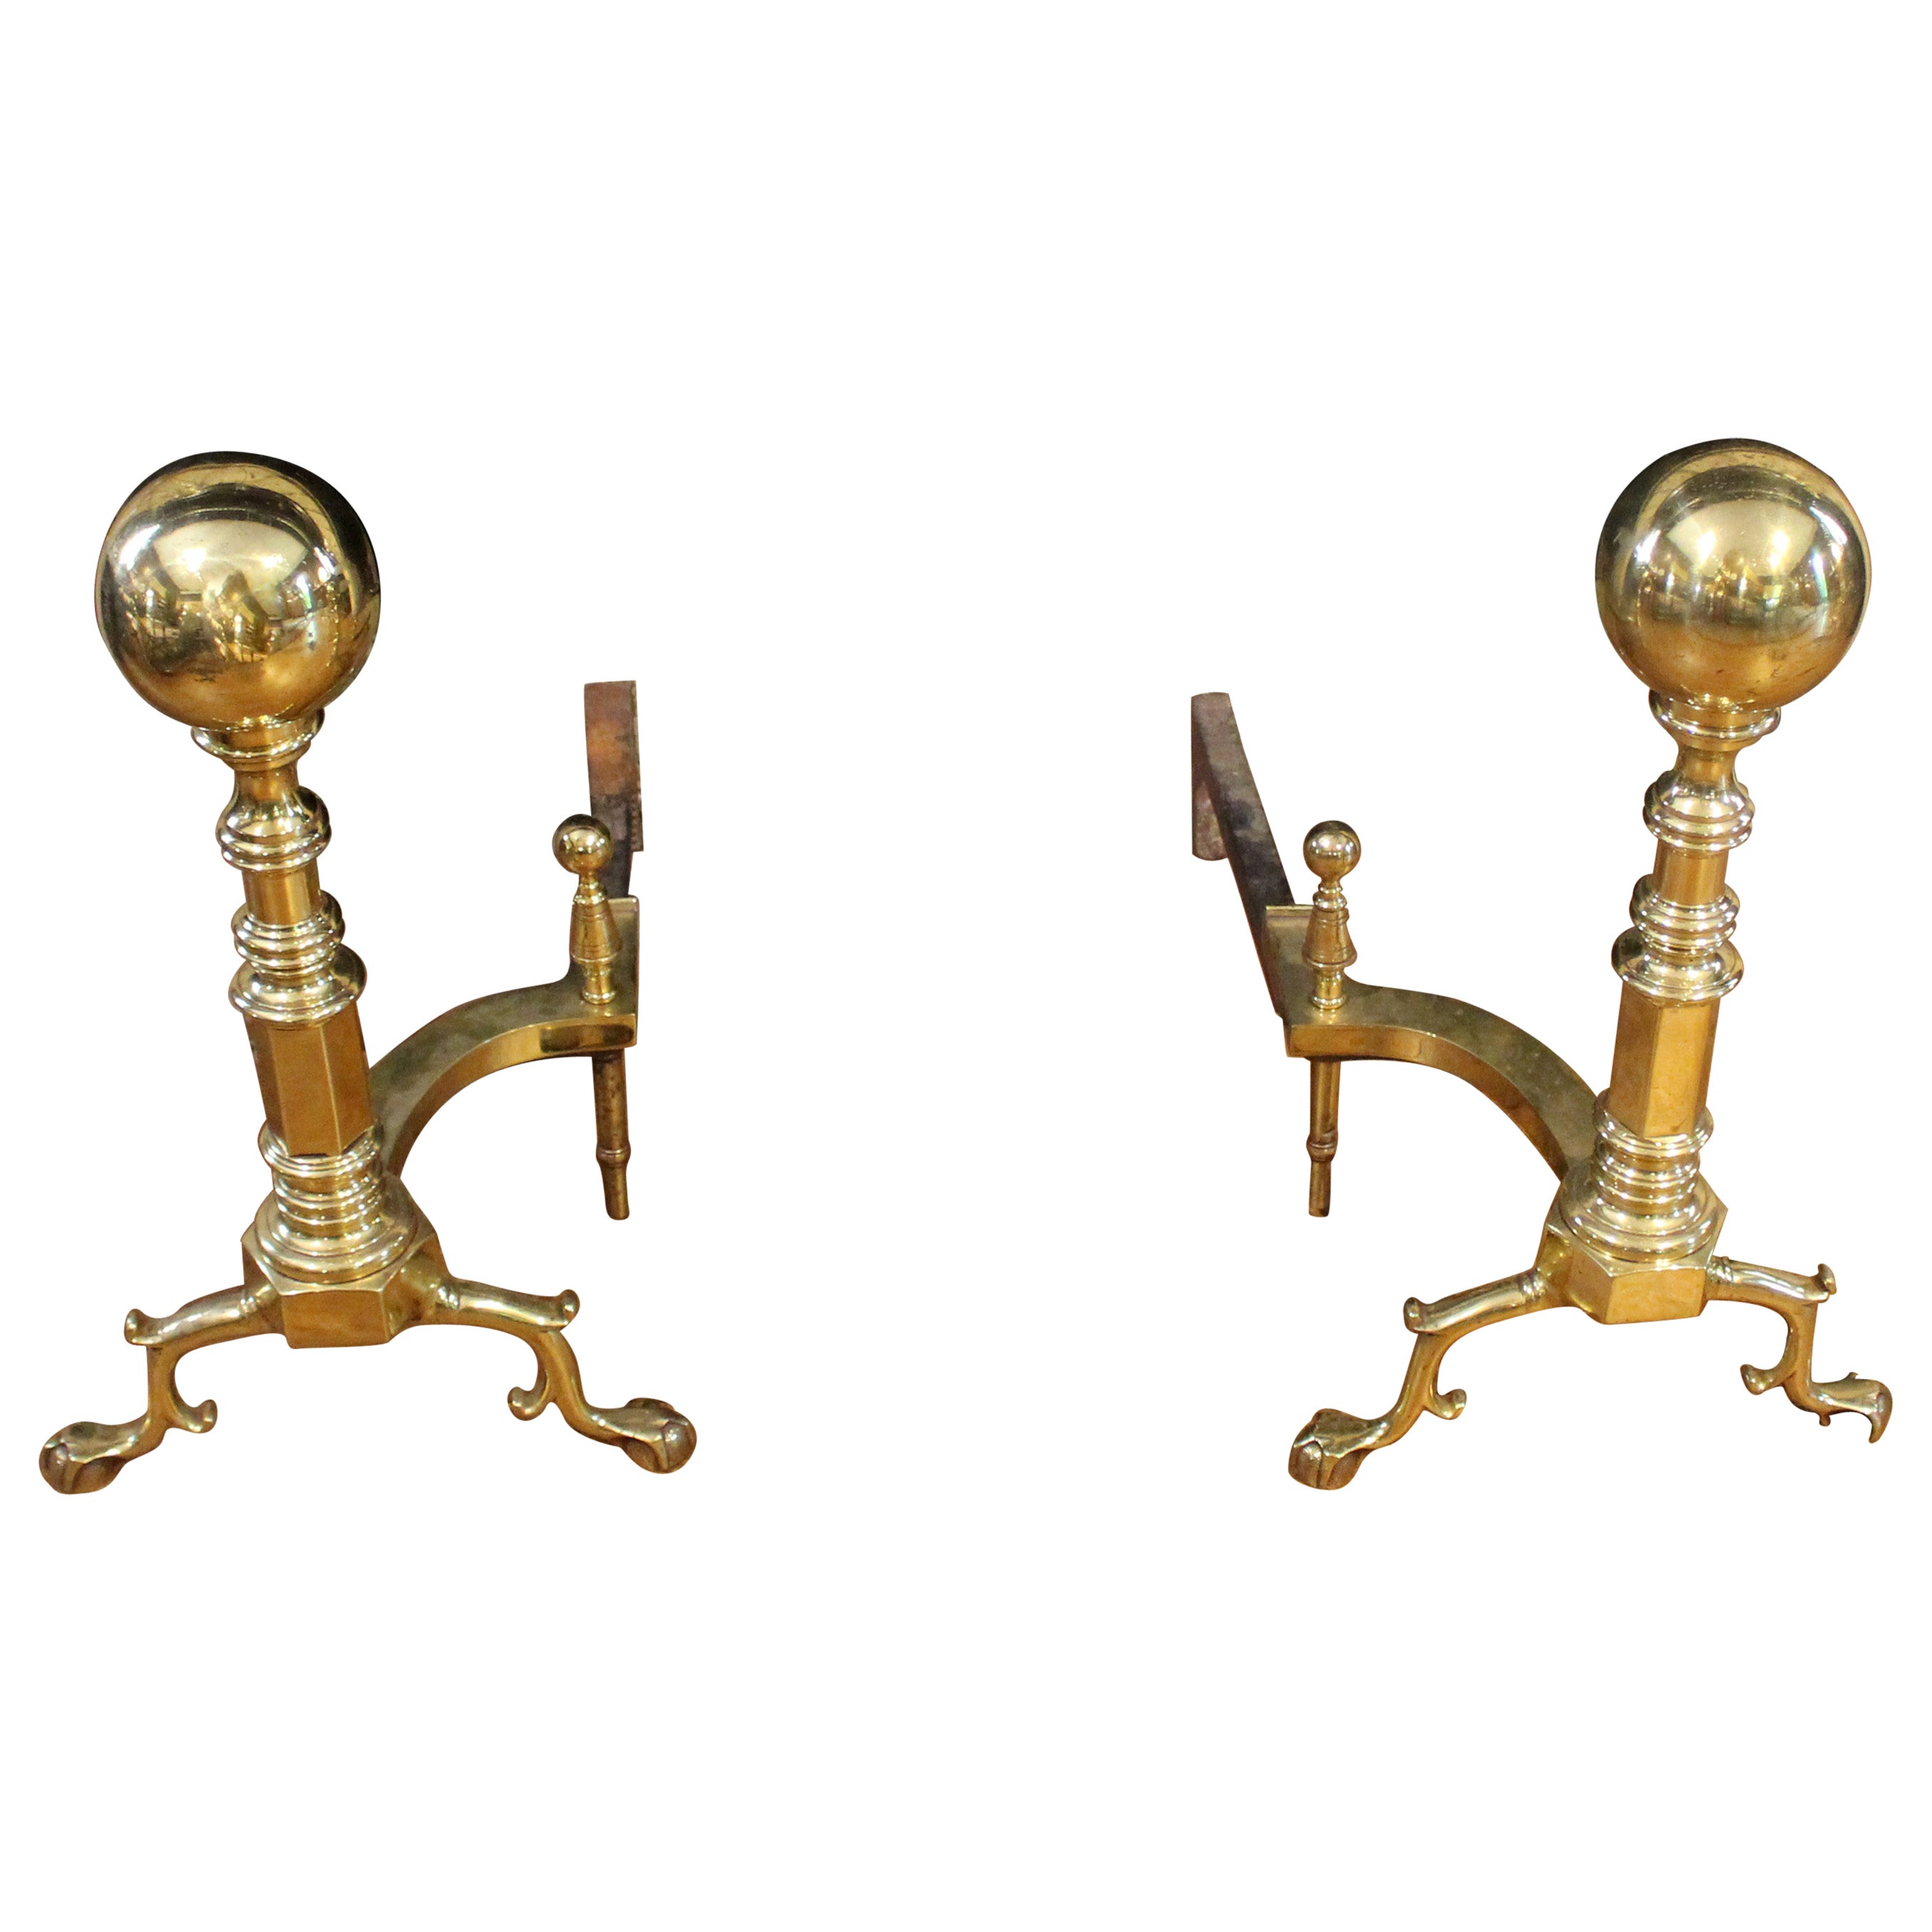 Pair of American Colonial Revival Brass Andirons